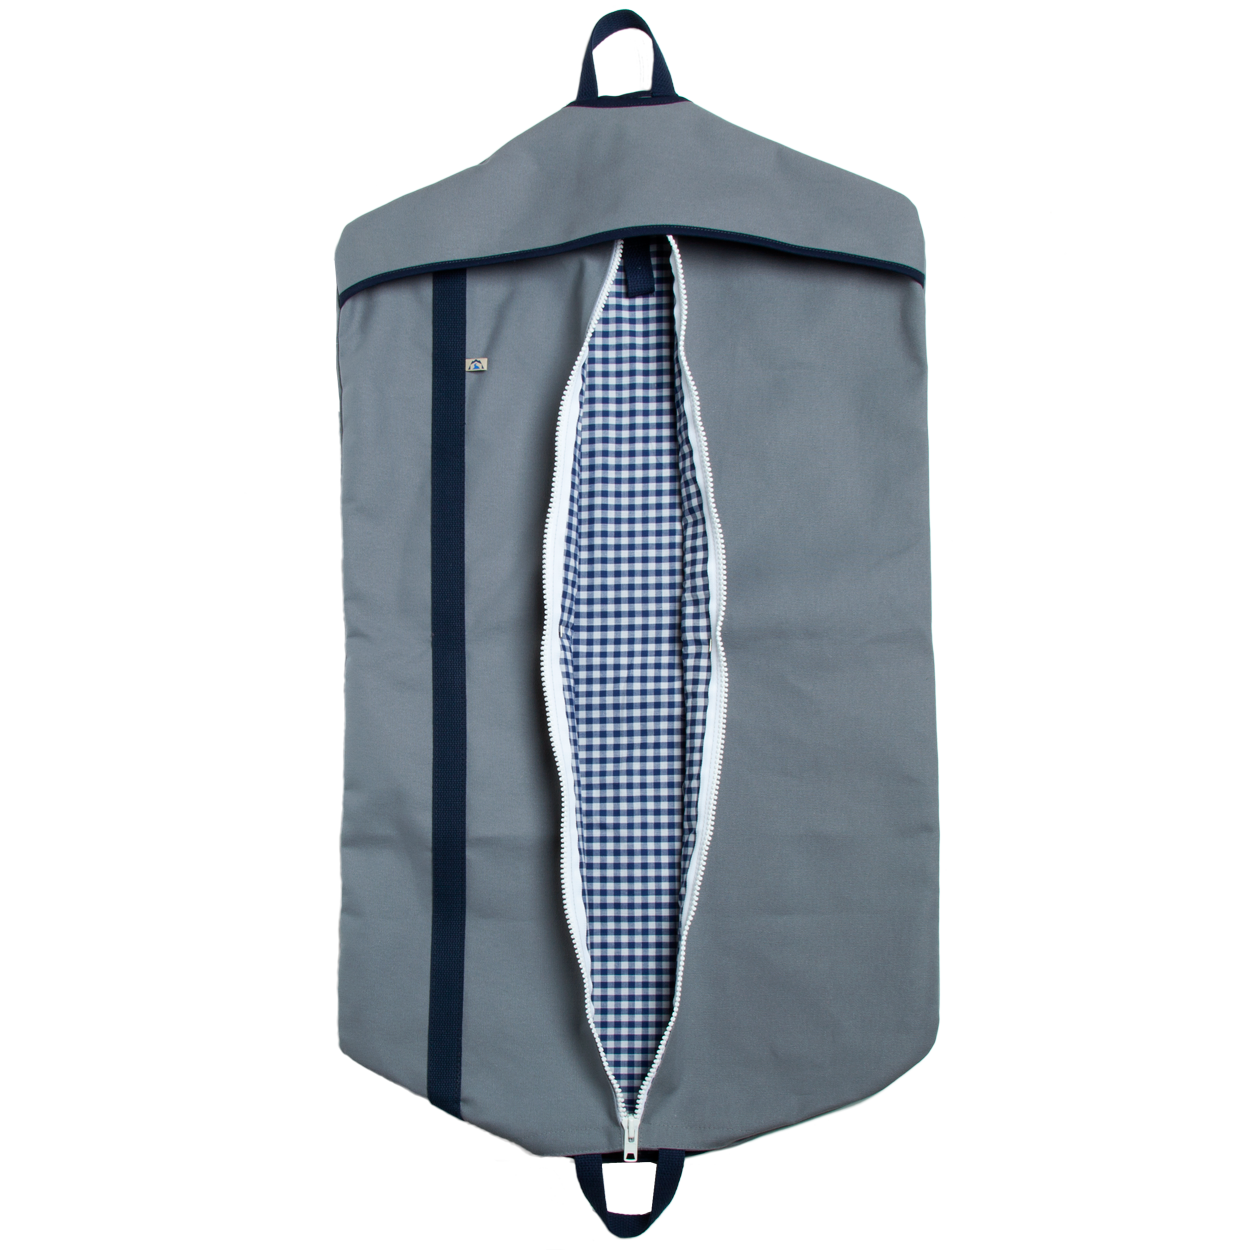 New Garment Bags from Hudson Sutler | Red Clay Soul